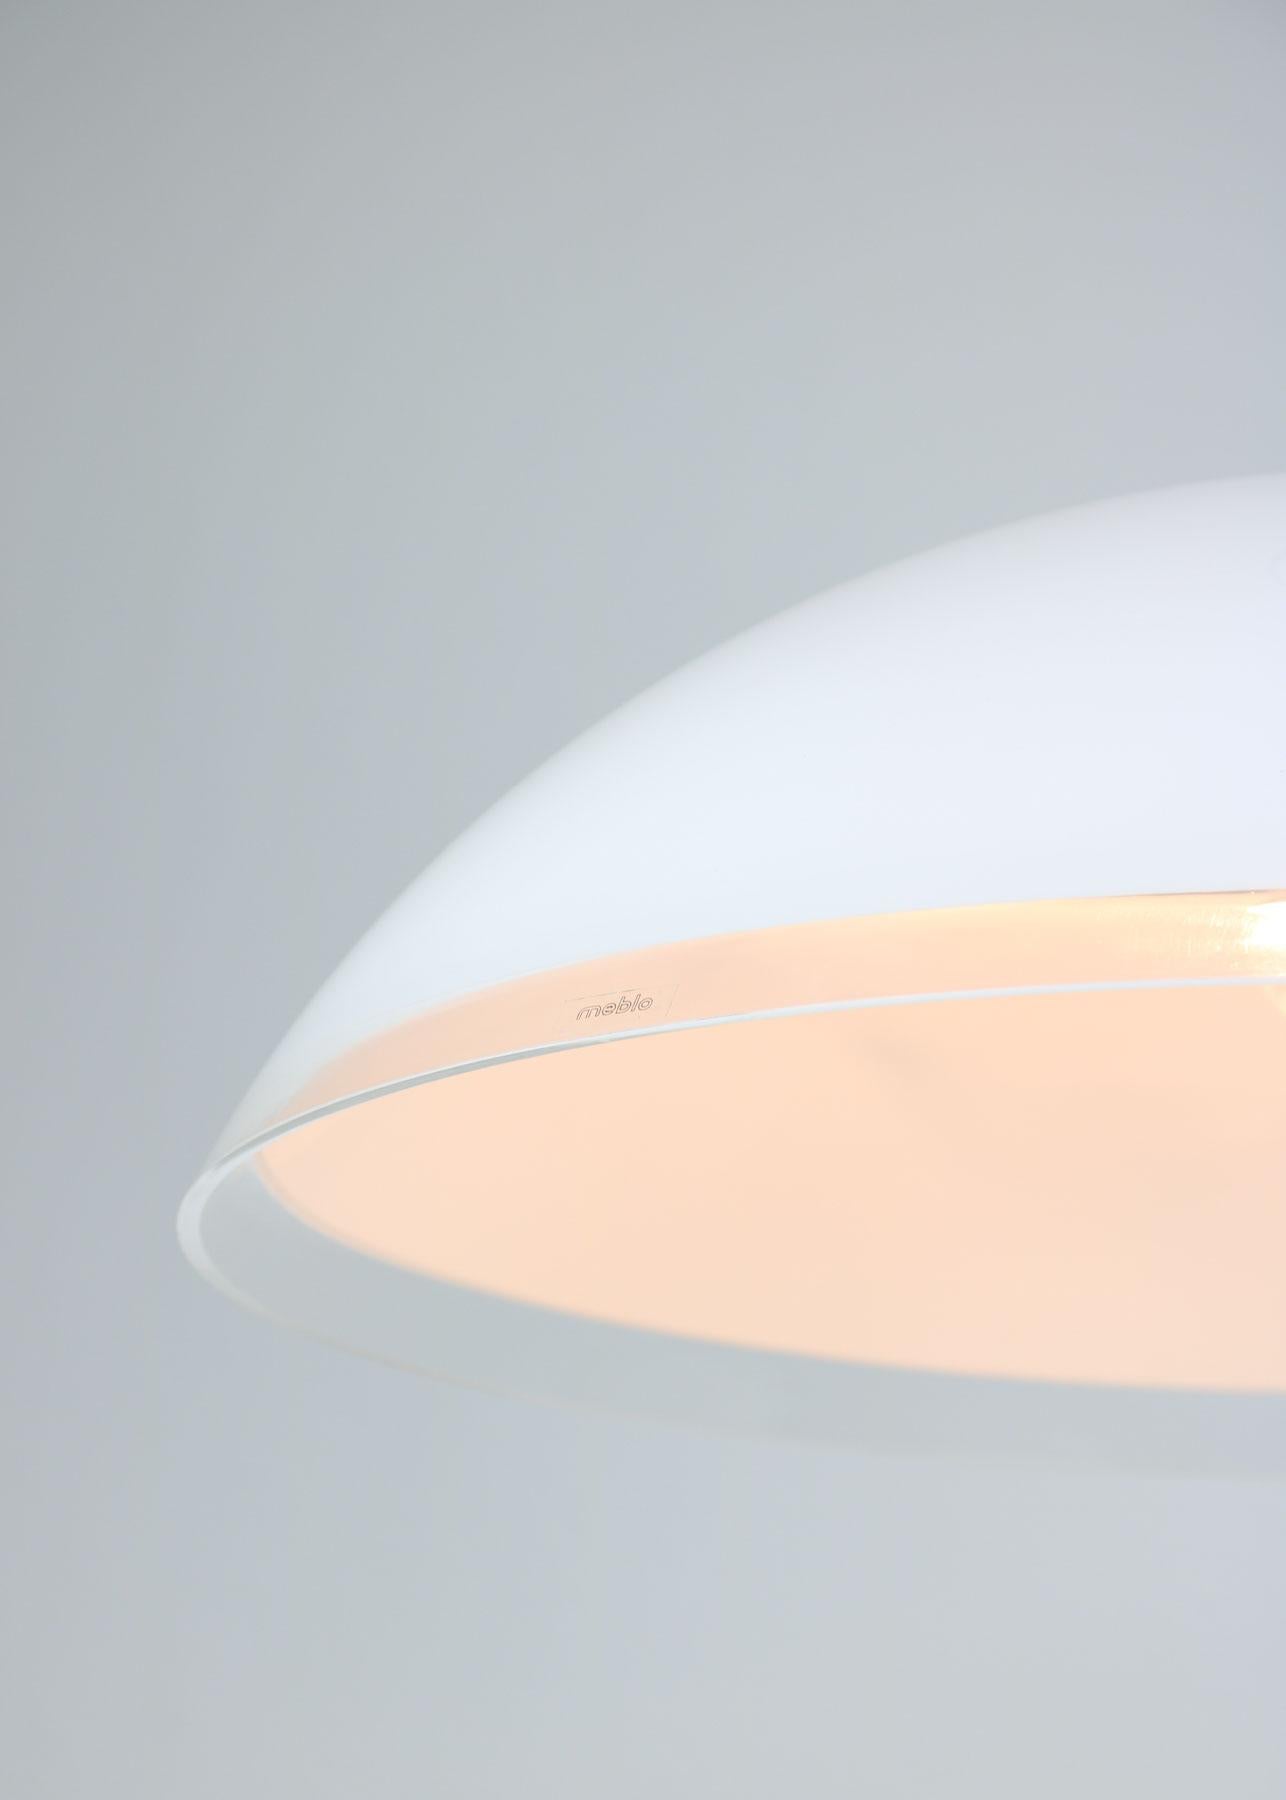 Large Mid-Century Saucer Pendant Lamp from Guzzini In Good Condition For Sale In Ljubljana, SI